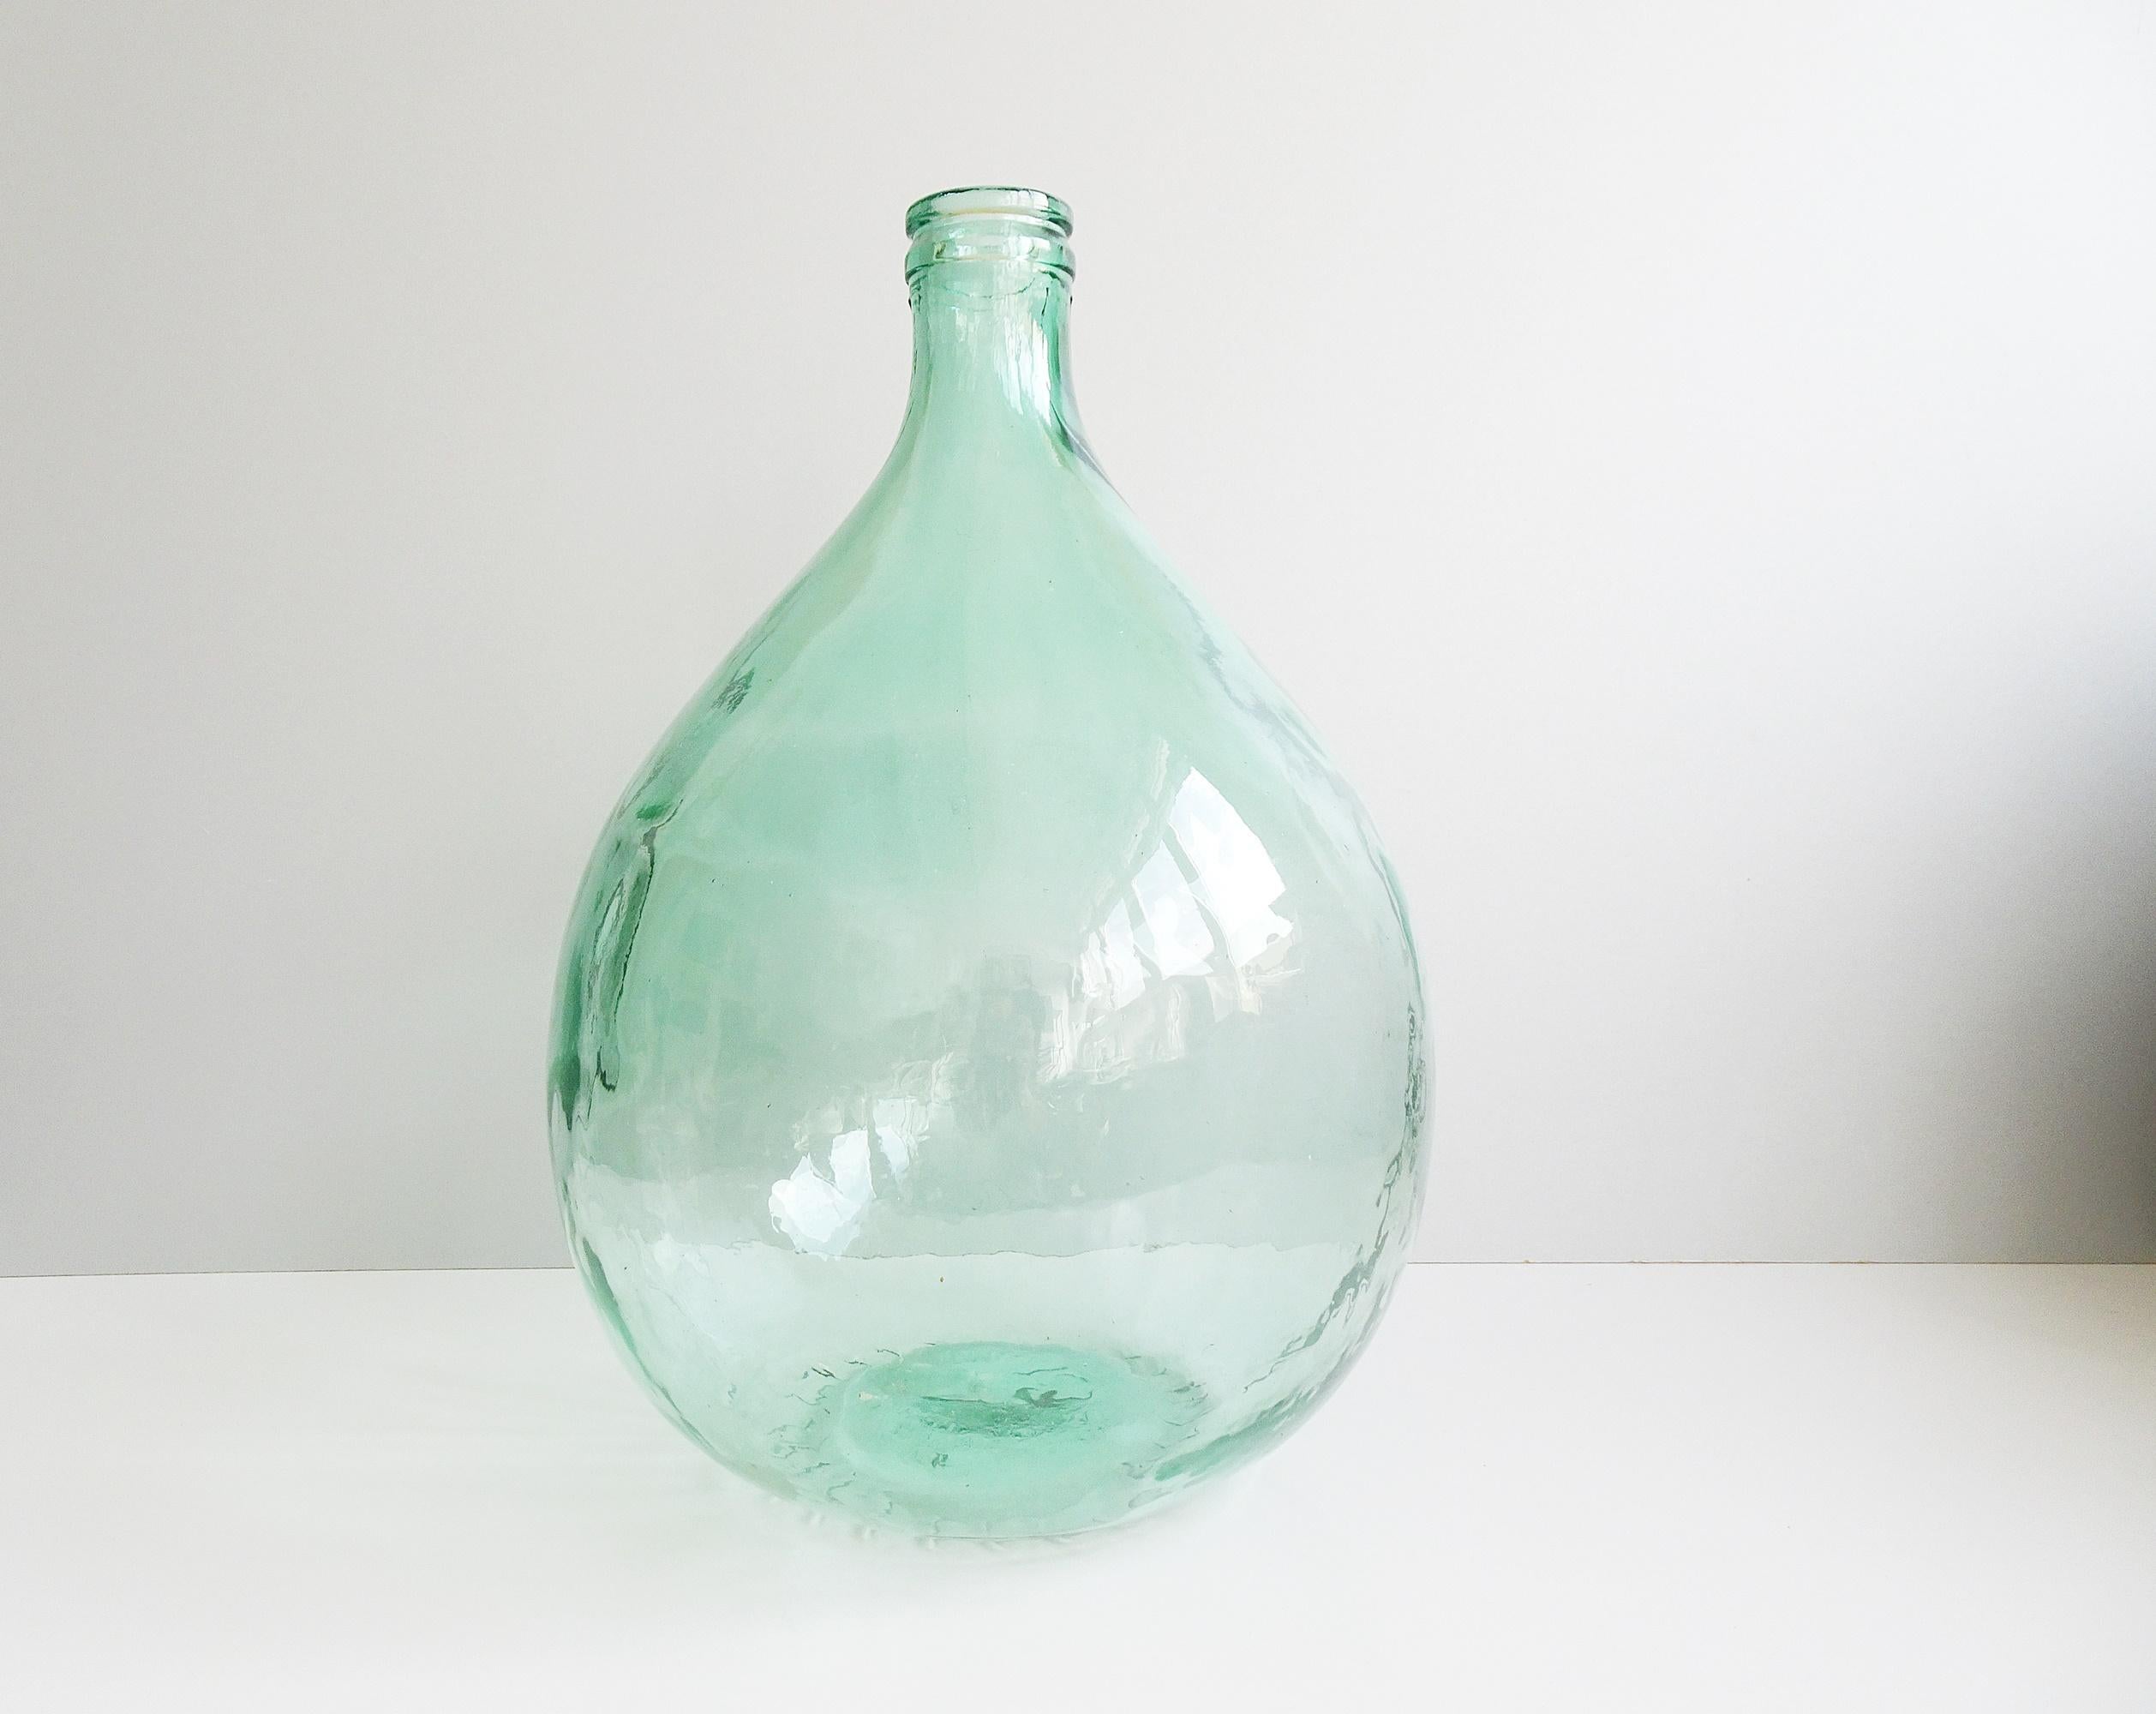 This large light turquoise demijohn is a classic French demijohn from the 1950s. Light green / turquoise pressed glass with visible air pockets. A timeless home decor to set accents, as a floor vase with dried flowers, light catcher, alone or in